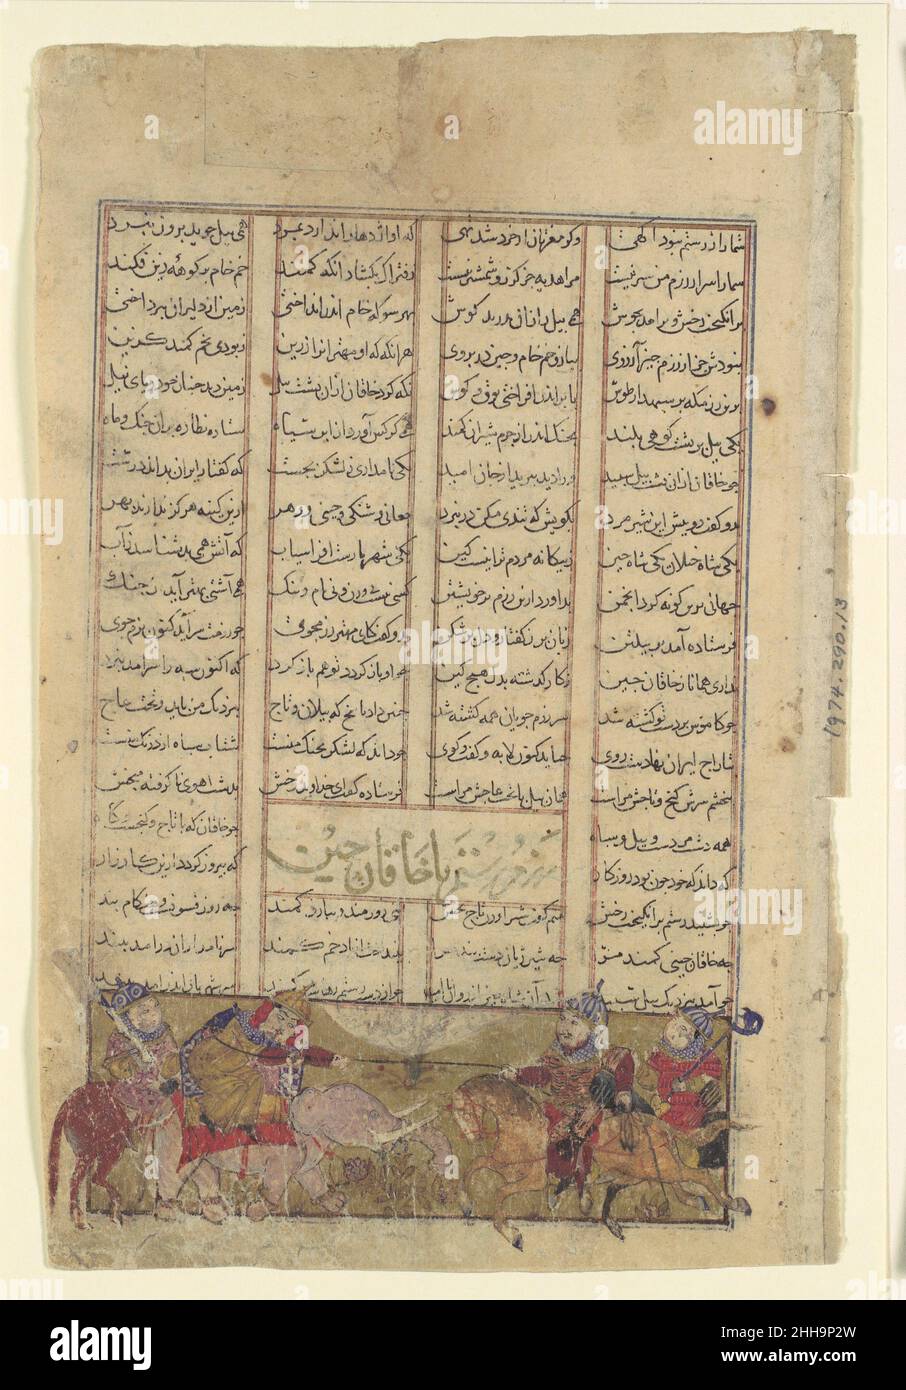 'Rustam Lassos the Khaqan of Chin, Pulling him from his White Elephant', Folio from a Shahnama (Book of Kings) ca. 1330–40 Abu'l Qasim Firdausi The Khaqan (khan) of Chin (China) become an ally of the Turanians and faced the Iranians with a vast army, including many sumptuously adorned war elephants. Rustam, despite the enormous odds, was determined to capture the khan and take the booty to the Iranian shah, Kai Khusrau. Rustam charged through a barrage of missiles unscathed, flung his lasso, pulled the khan from his white elephant, bound him as a prisoner, and duly sent the loot to the shah. A Stock Photo